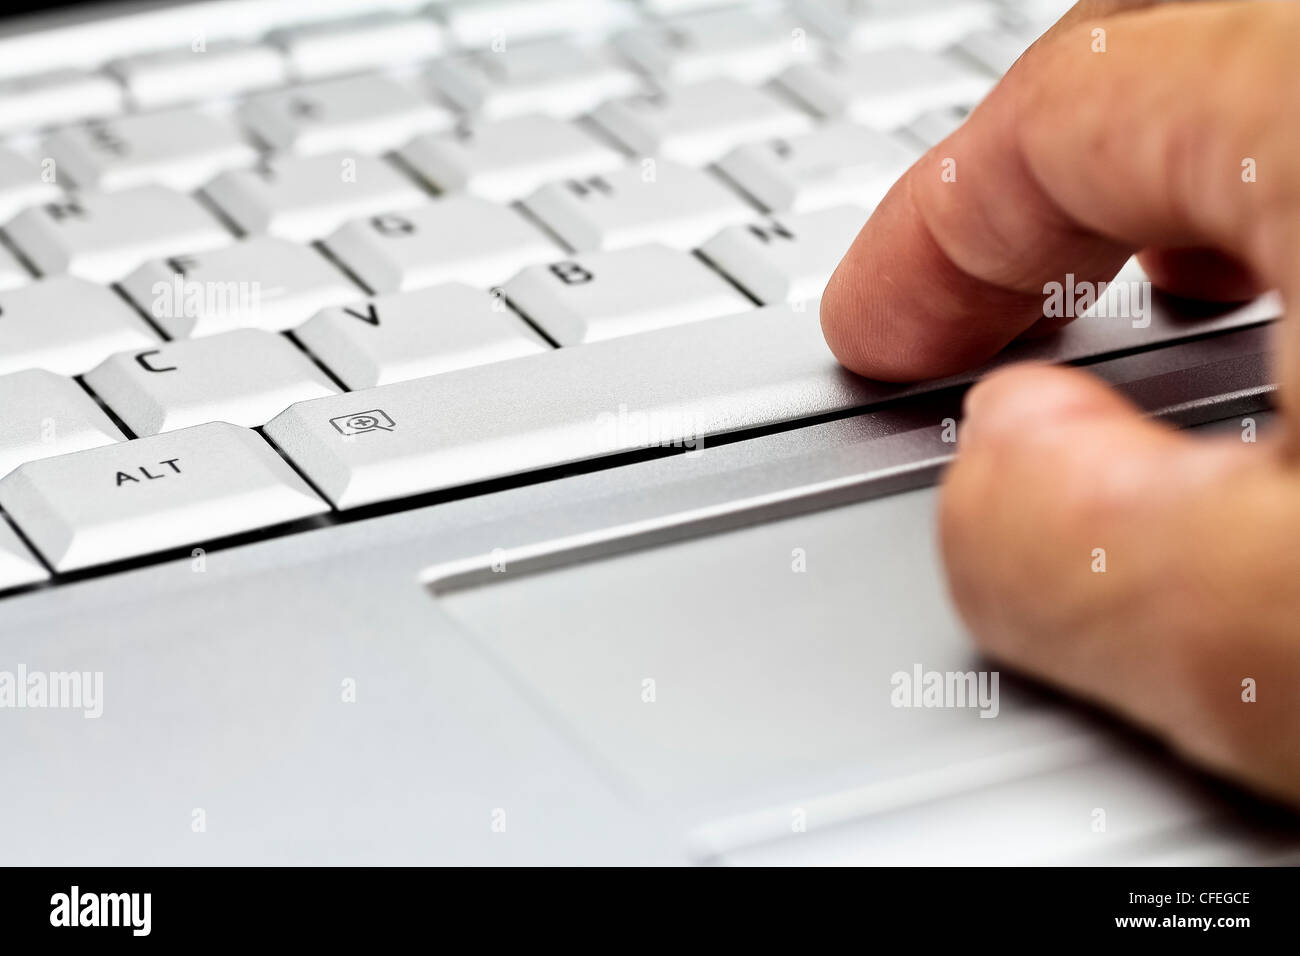 Right hand on laptop keyboard Stock Photo